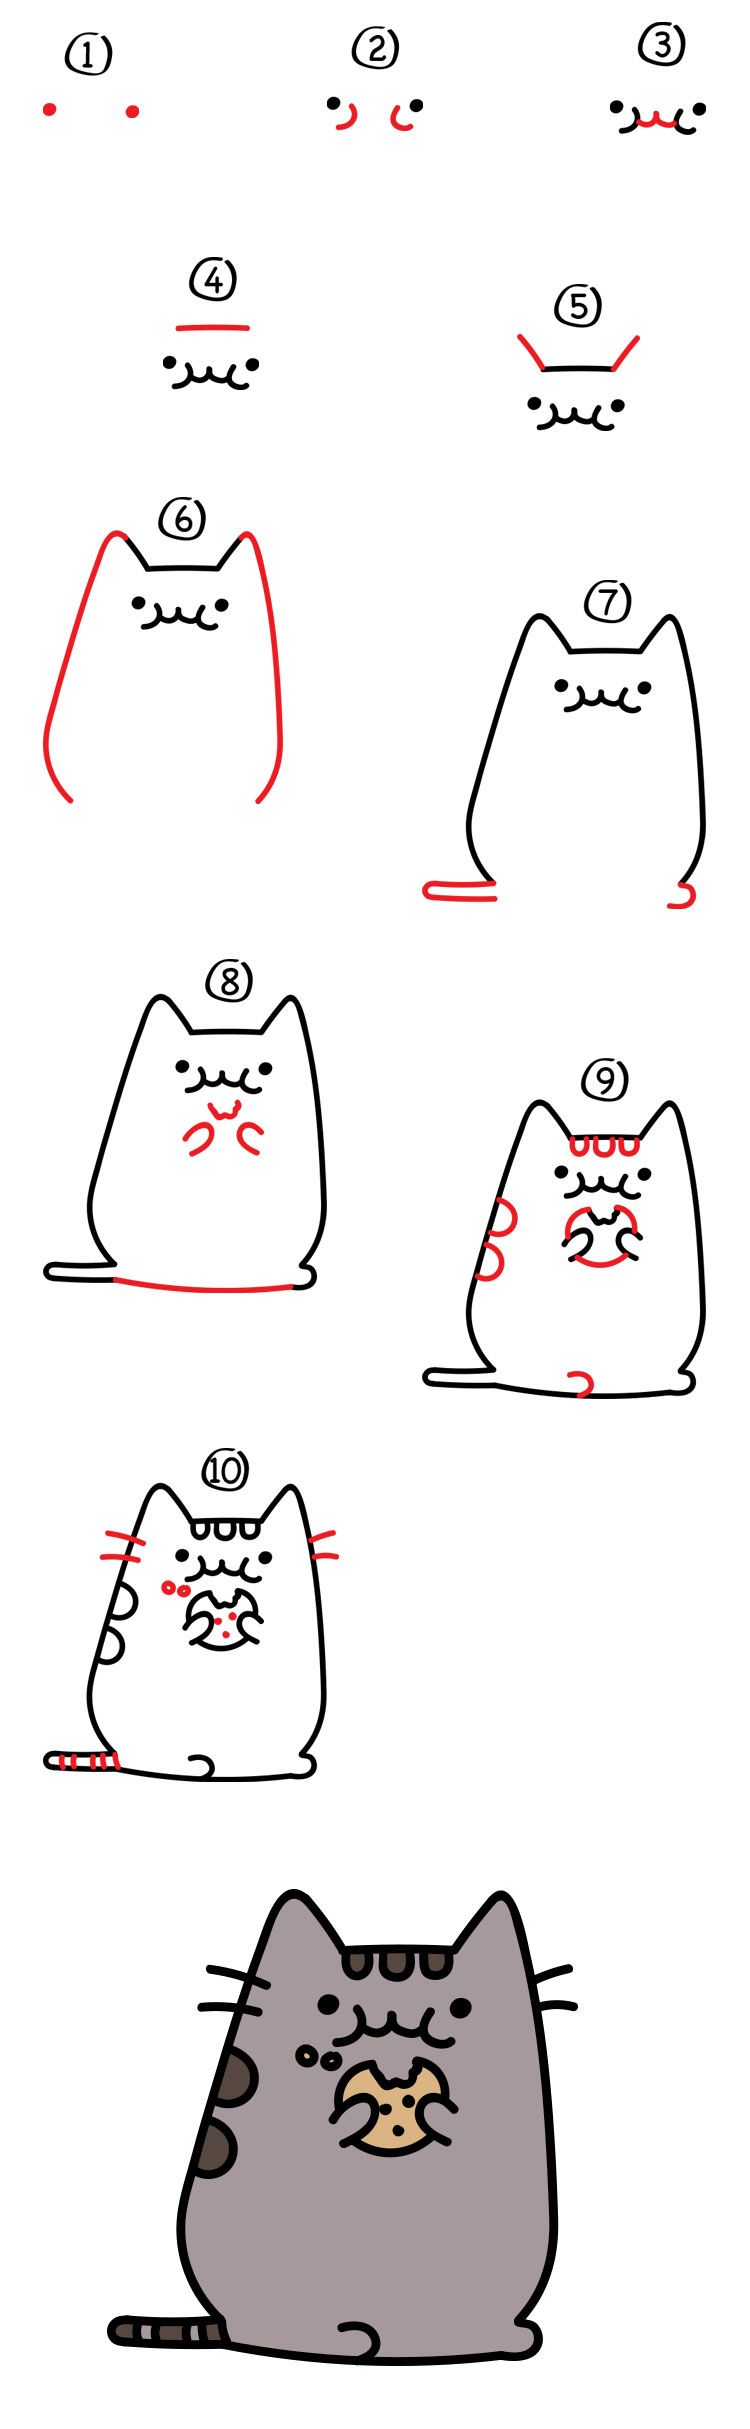 How To Draw Pusheen Eating Follow Along To Learn How To Draw This Cute Pusheen Cat Inspired By